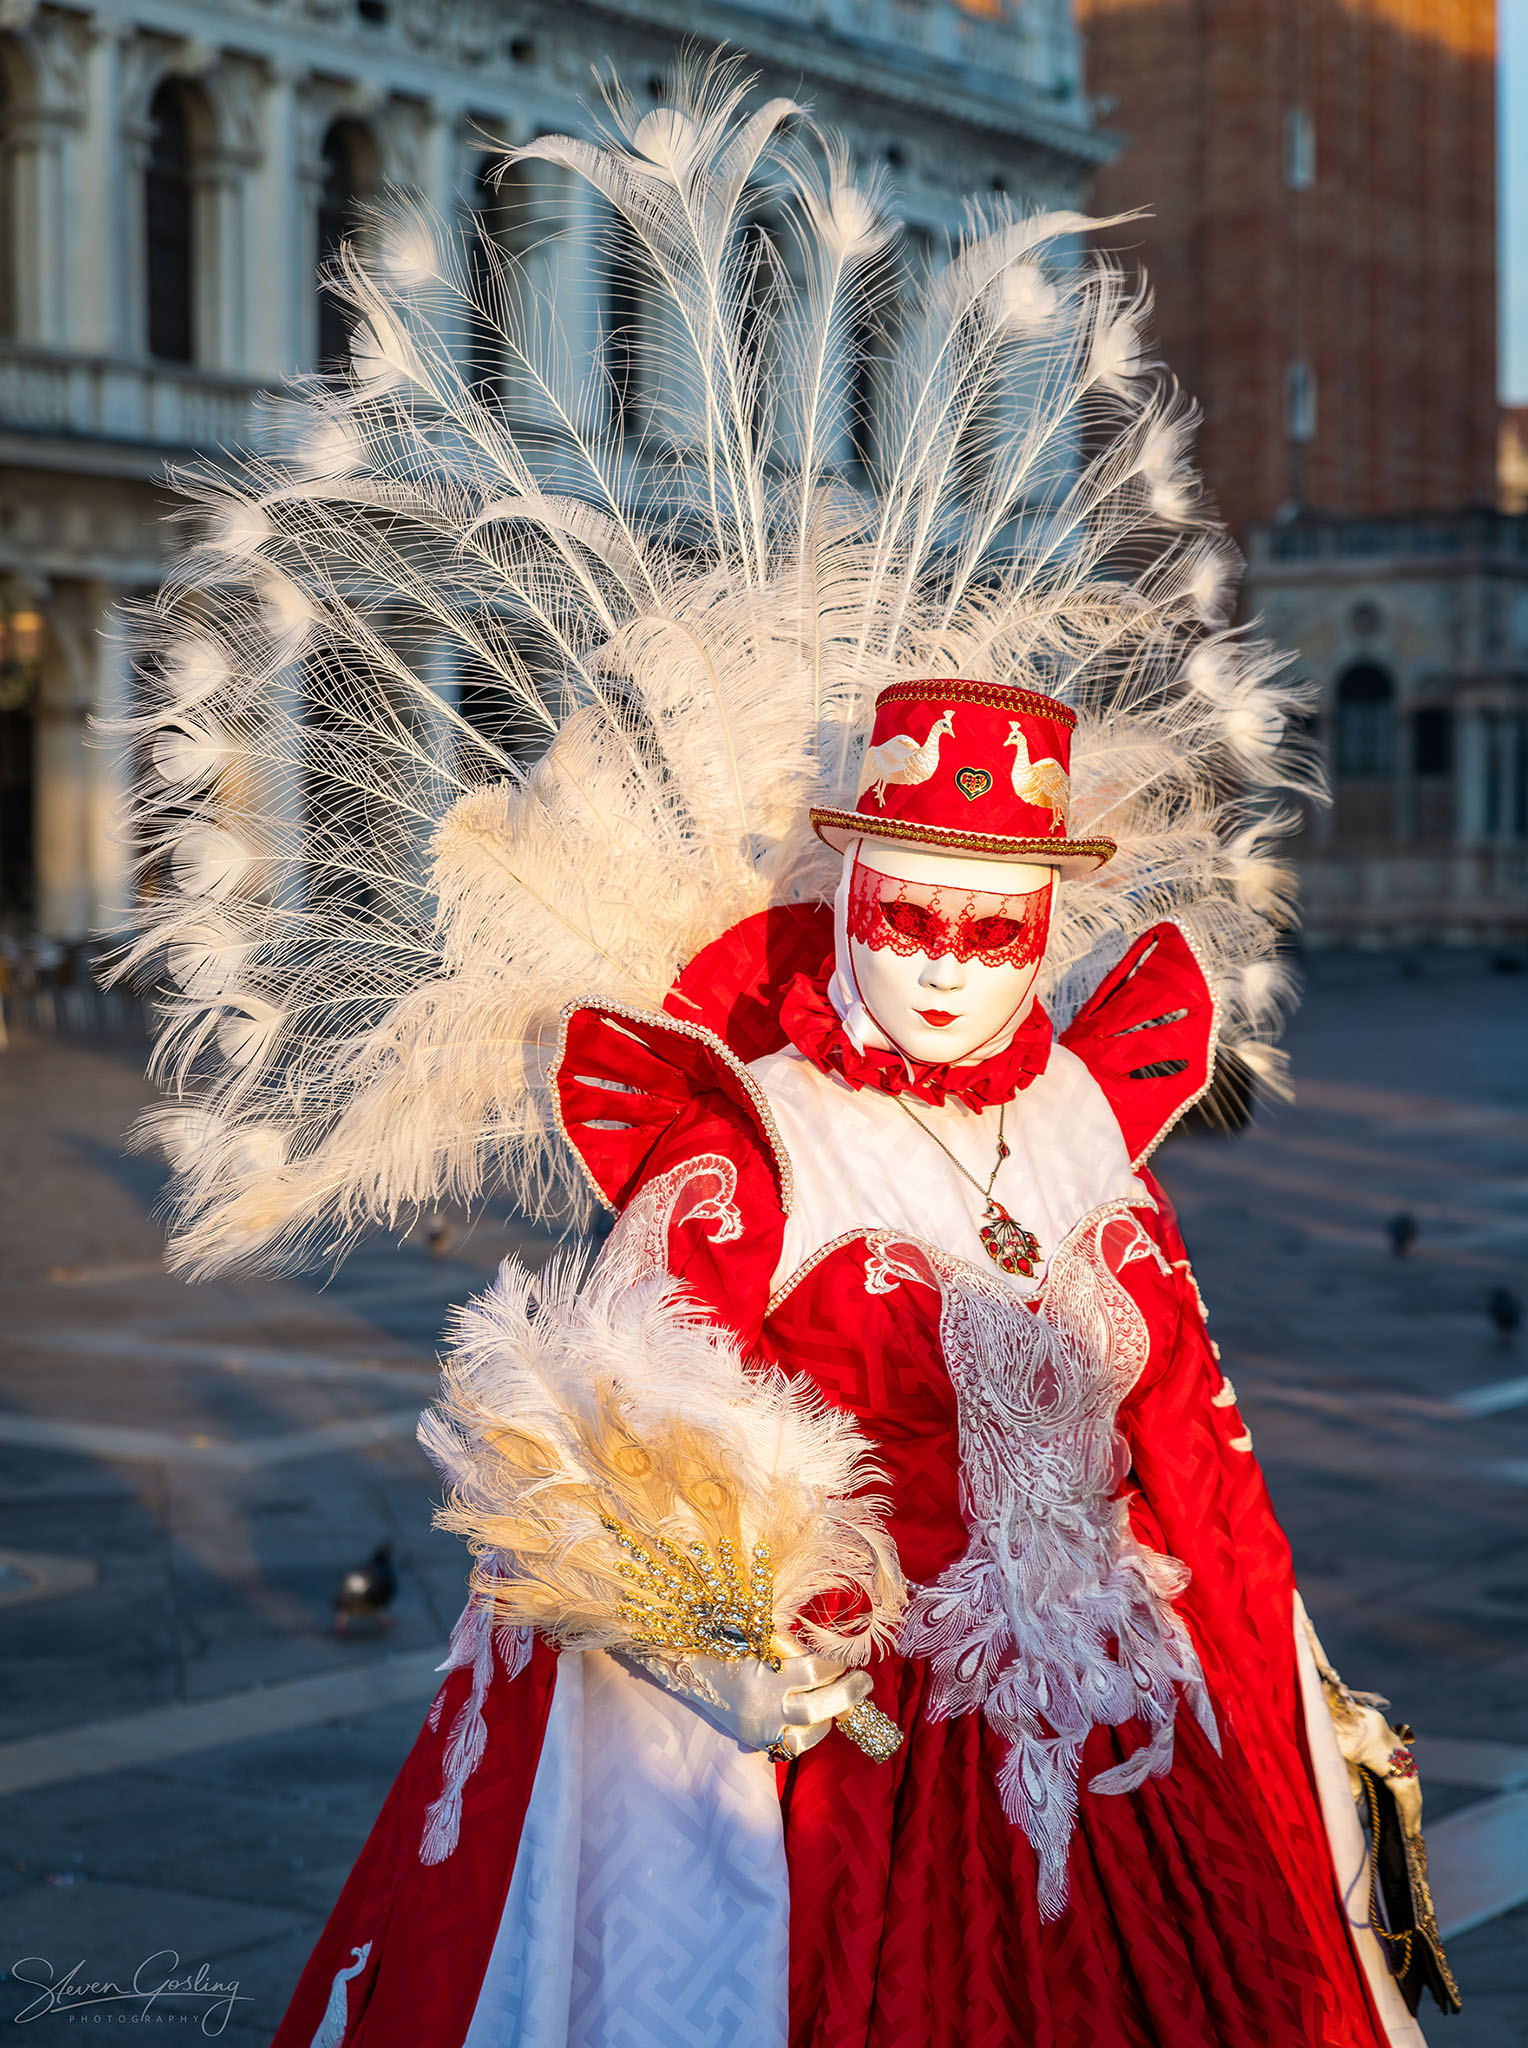 Ballet & Ball Gowns Photography Workshop at the Venice Carnival 123